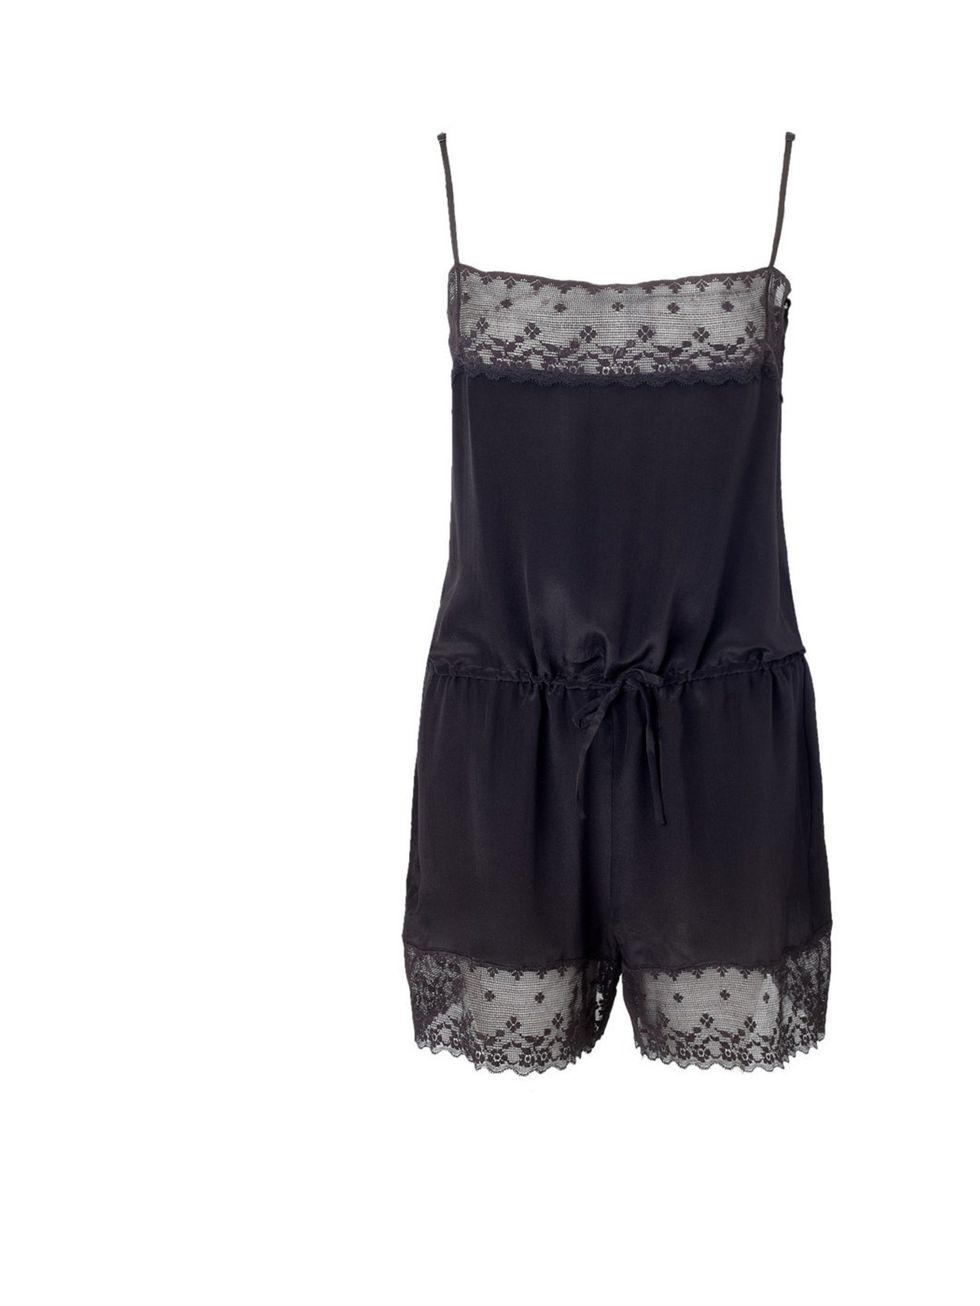 <p>Aloe black crepe lace playsuit, £155 at Avenue 32</p><p><a href="http://www.avenue32.com/clothing/all-clothing/black-crepe-lace-playsuit-17901.html">BUY NOW</a></p>